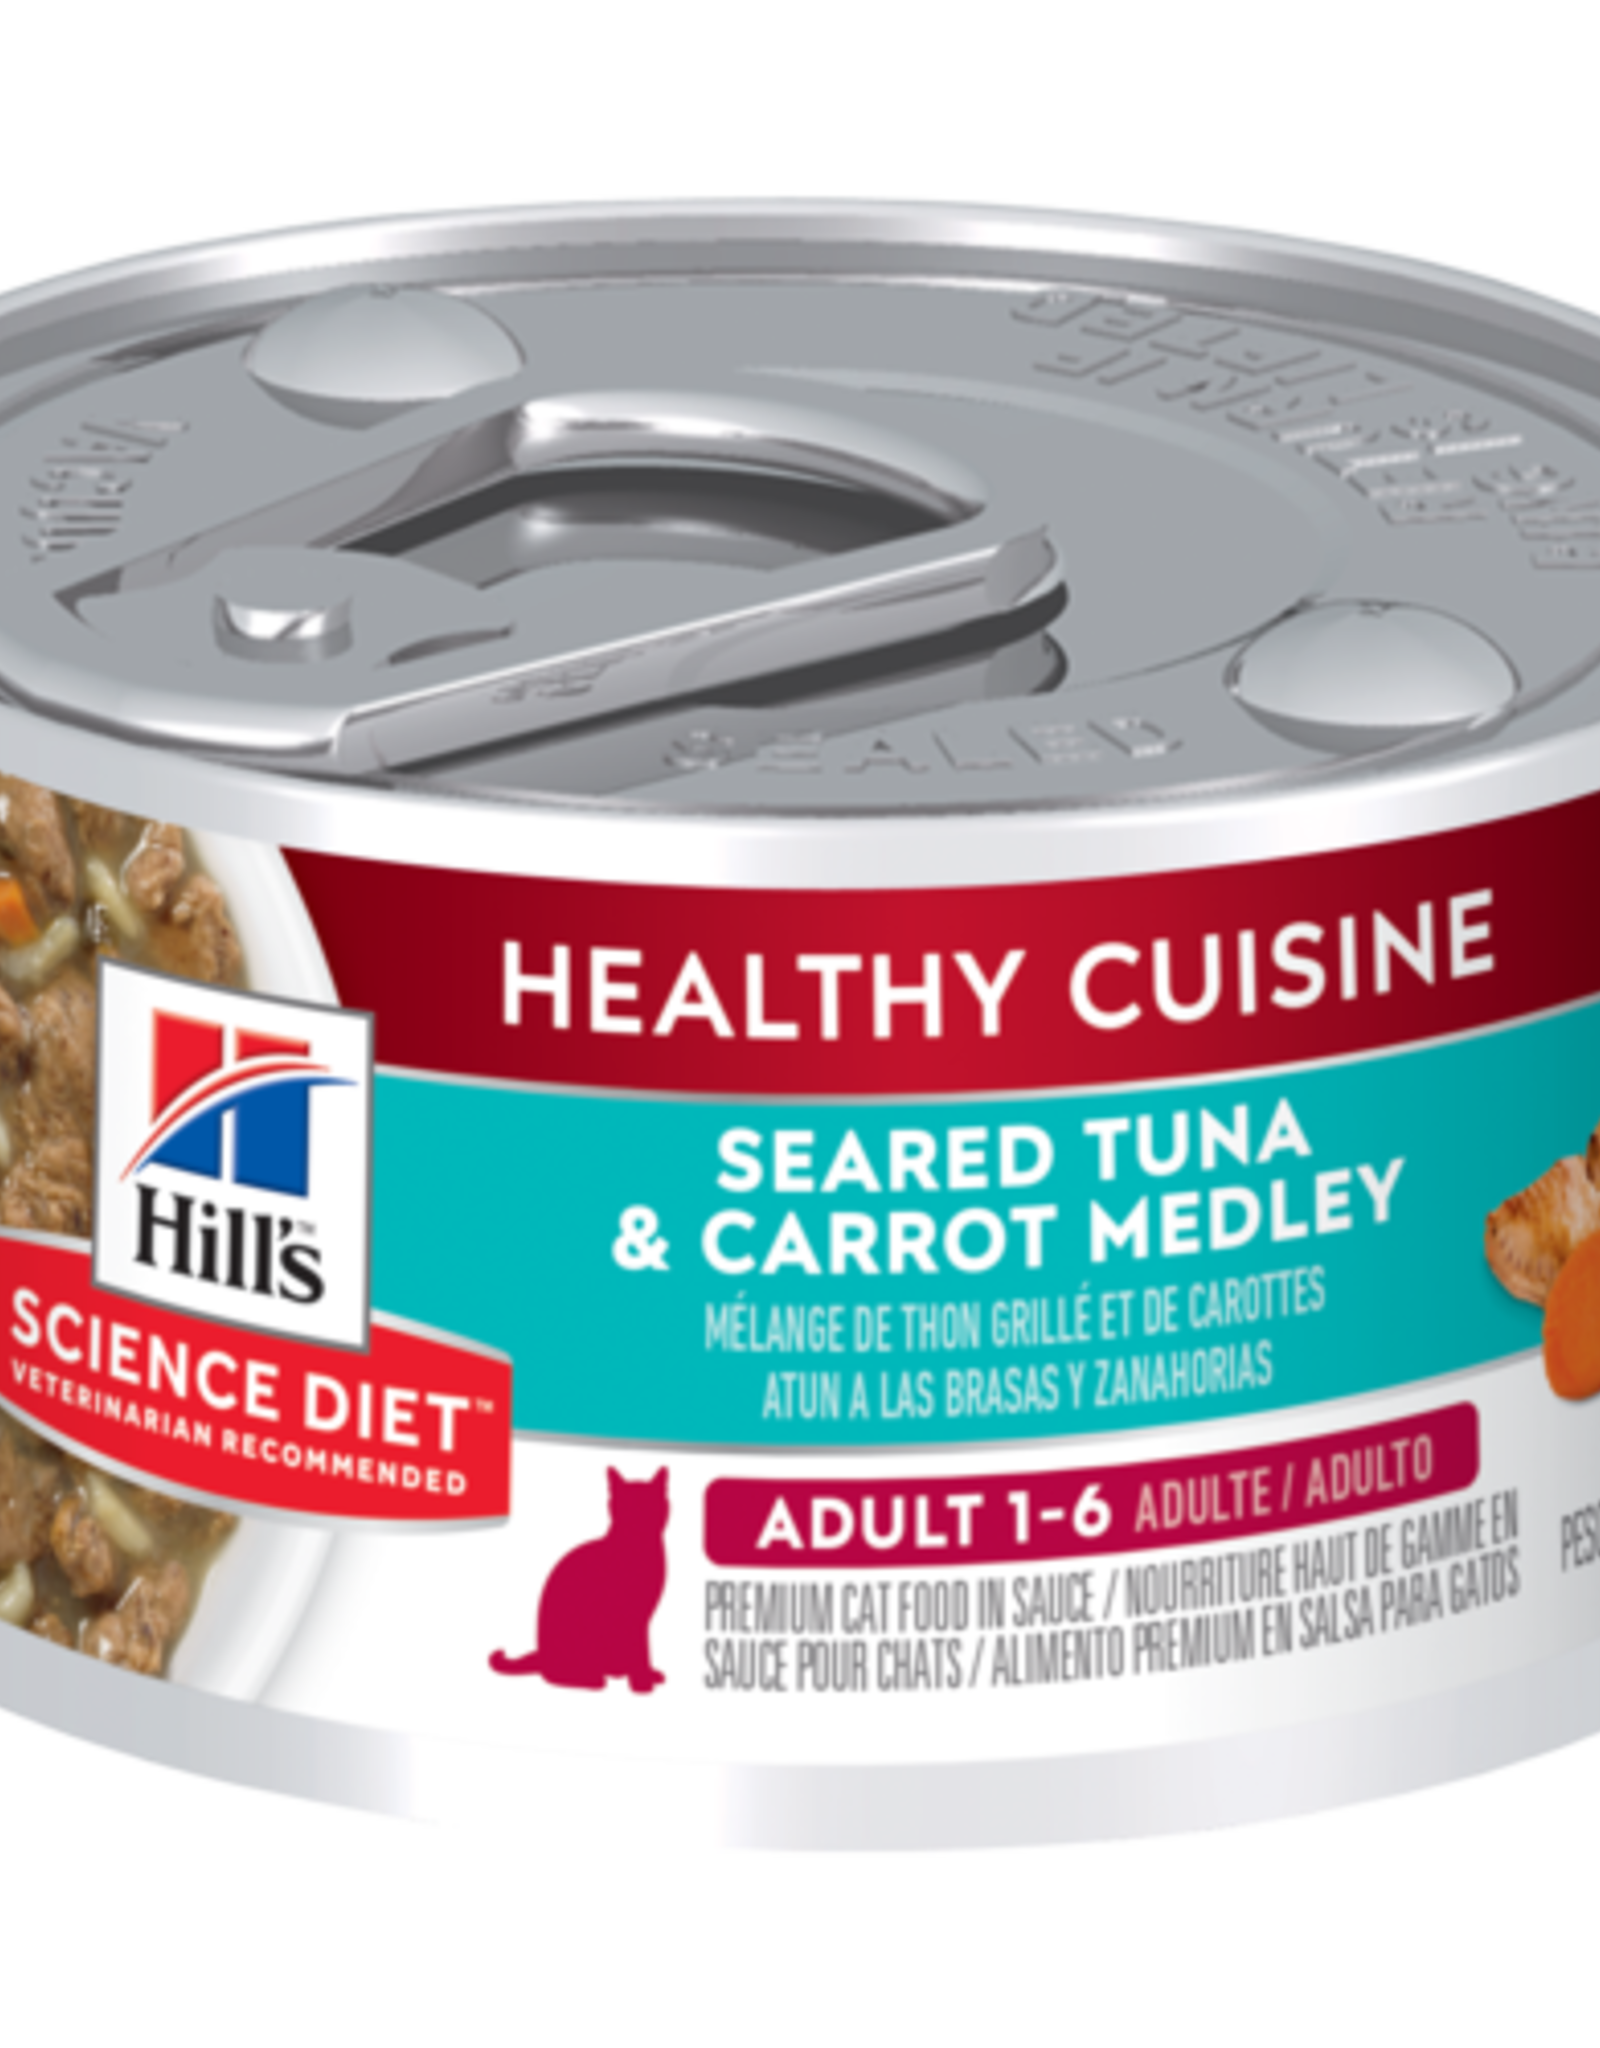 SCIENCE DIET HILL'S SCIENCE DIET CAT HEALTHY CUISINE ADULT TUNA & CARROTS 2.8OZ CASE OF 24